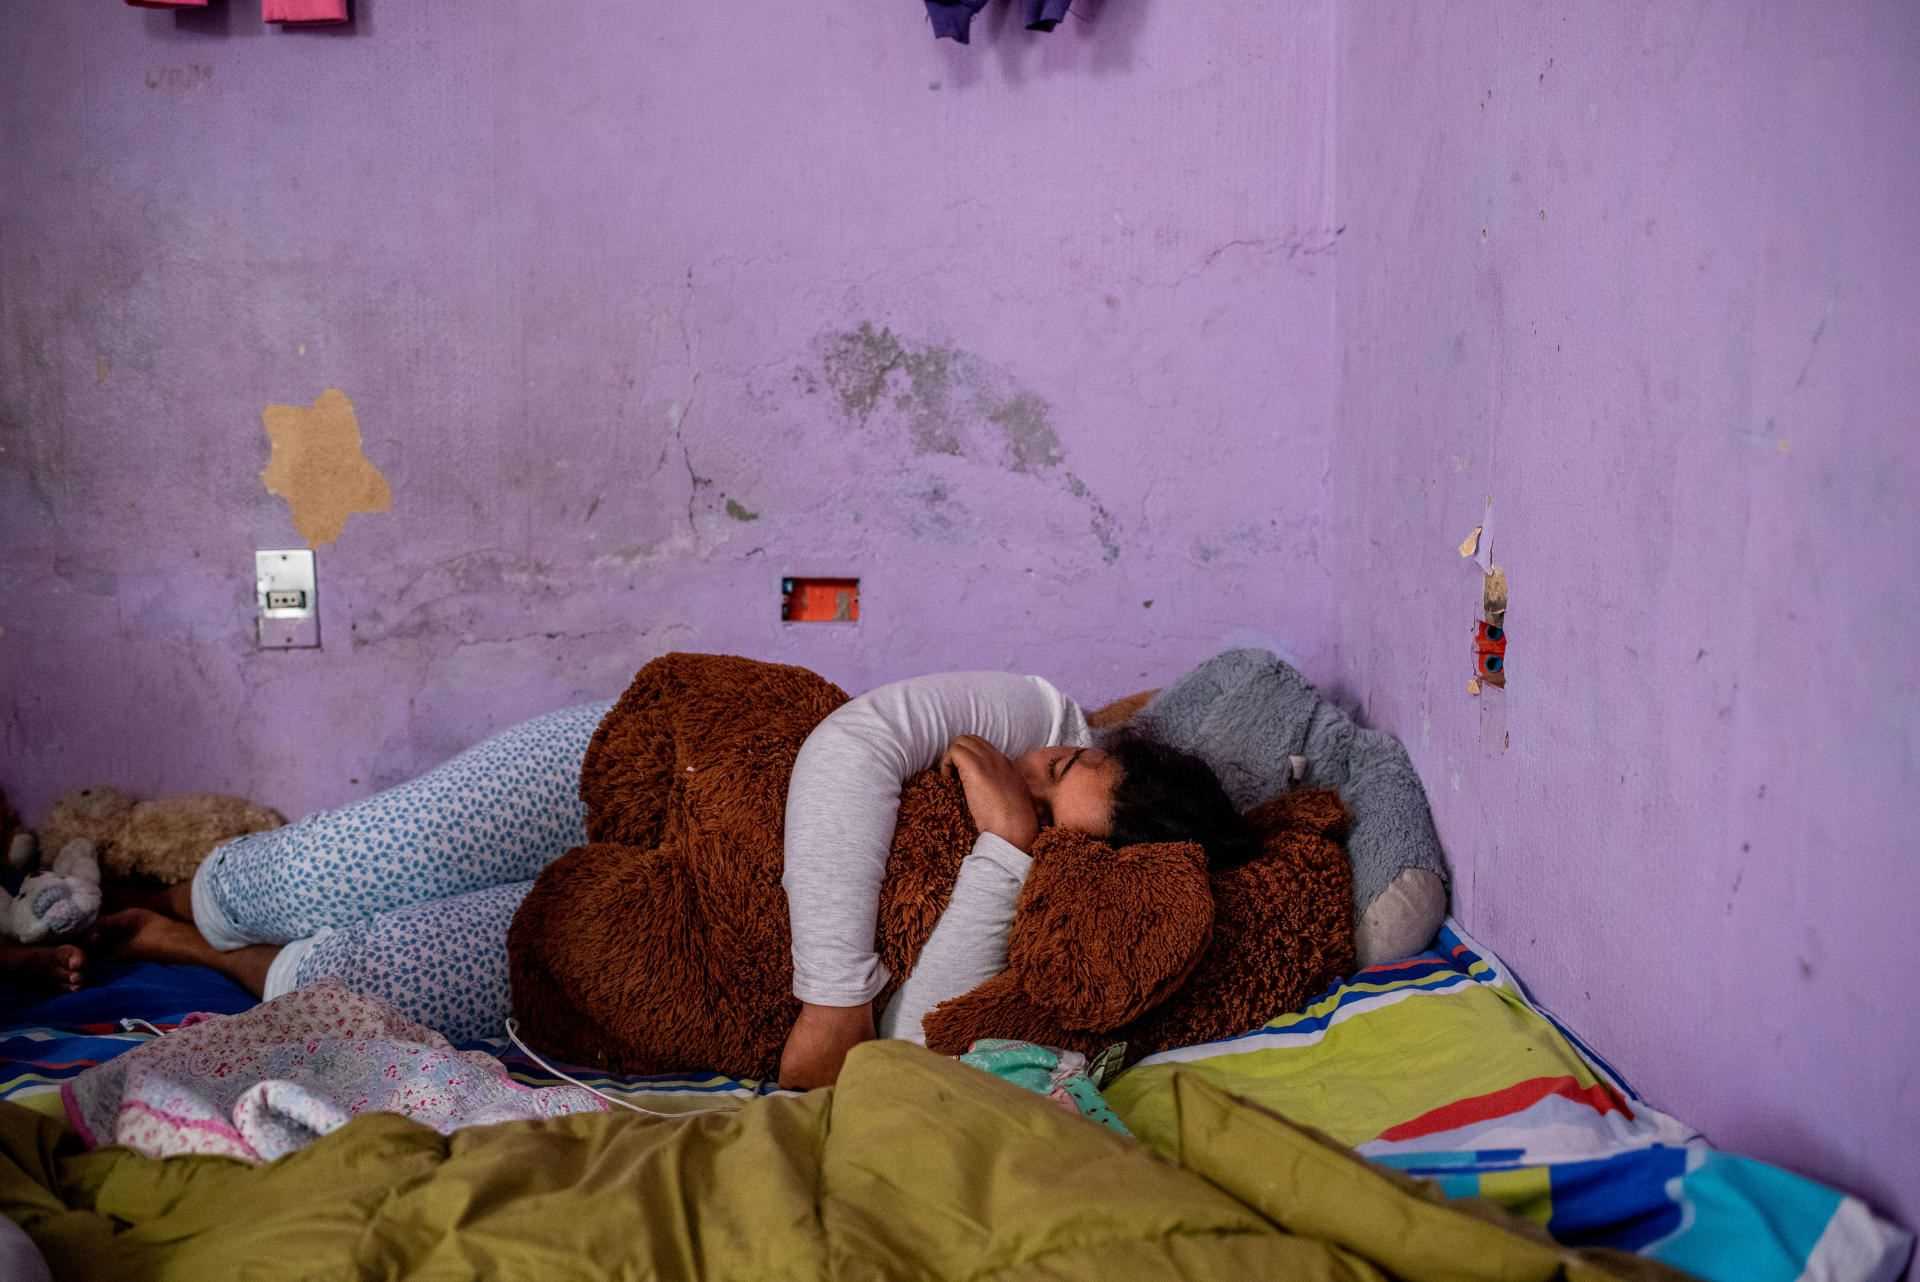 Rosneidi, 11, in the temporary room where she sleeps with her family, in Santiago, on November 19, 2021